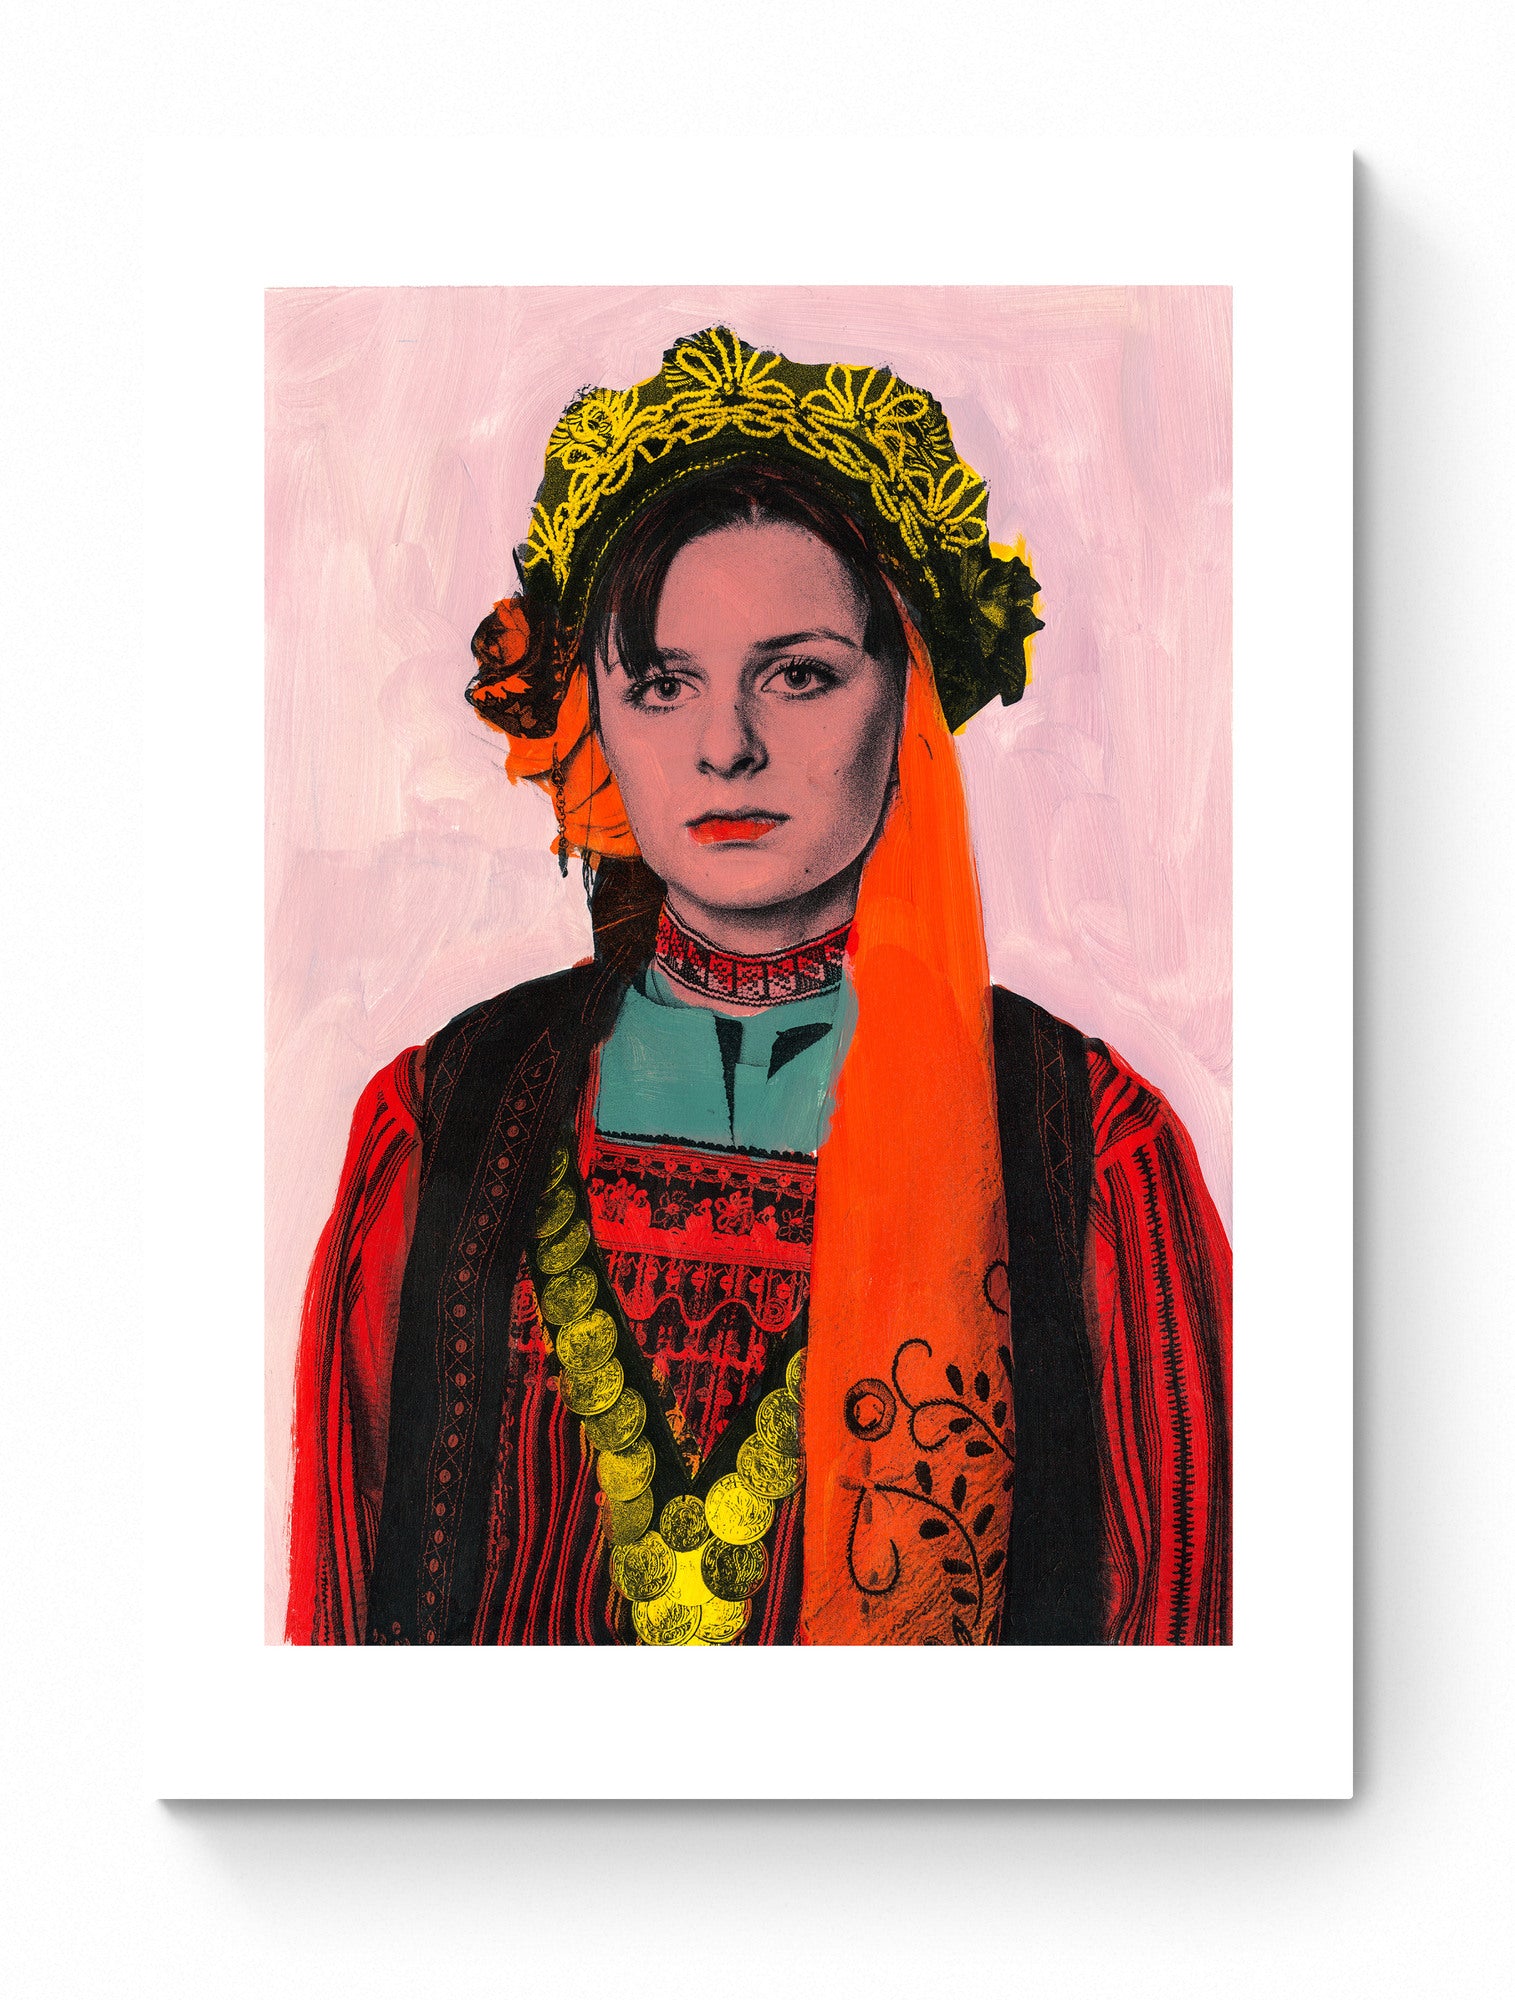 Painting Pop Art Wall Art from Greece | Orange Scarf Metaxades Costume from Evros, Thrace, by George Tatakis - poster